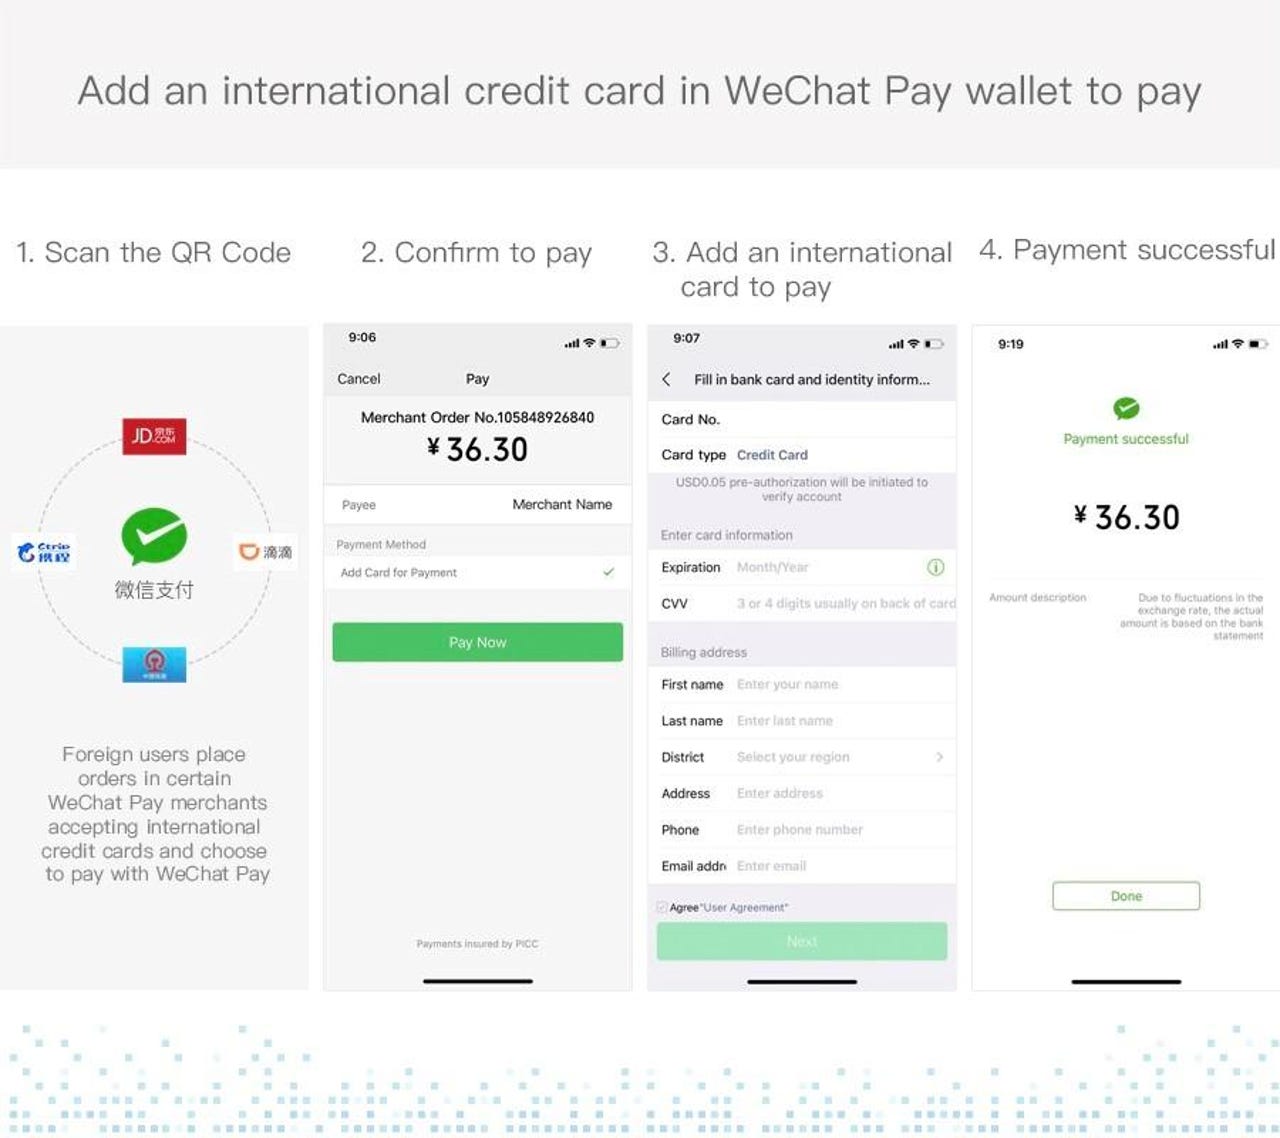 tencent-and-five-major-international-card-organizations-are-cooperating-to-support-overseas-users-to-use-wechat-pay-in-mainland-china.jpg